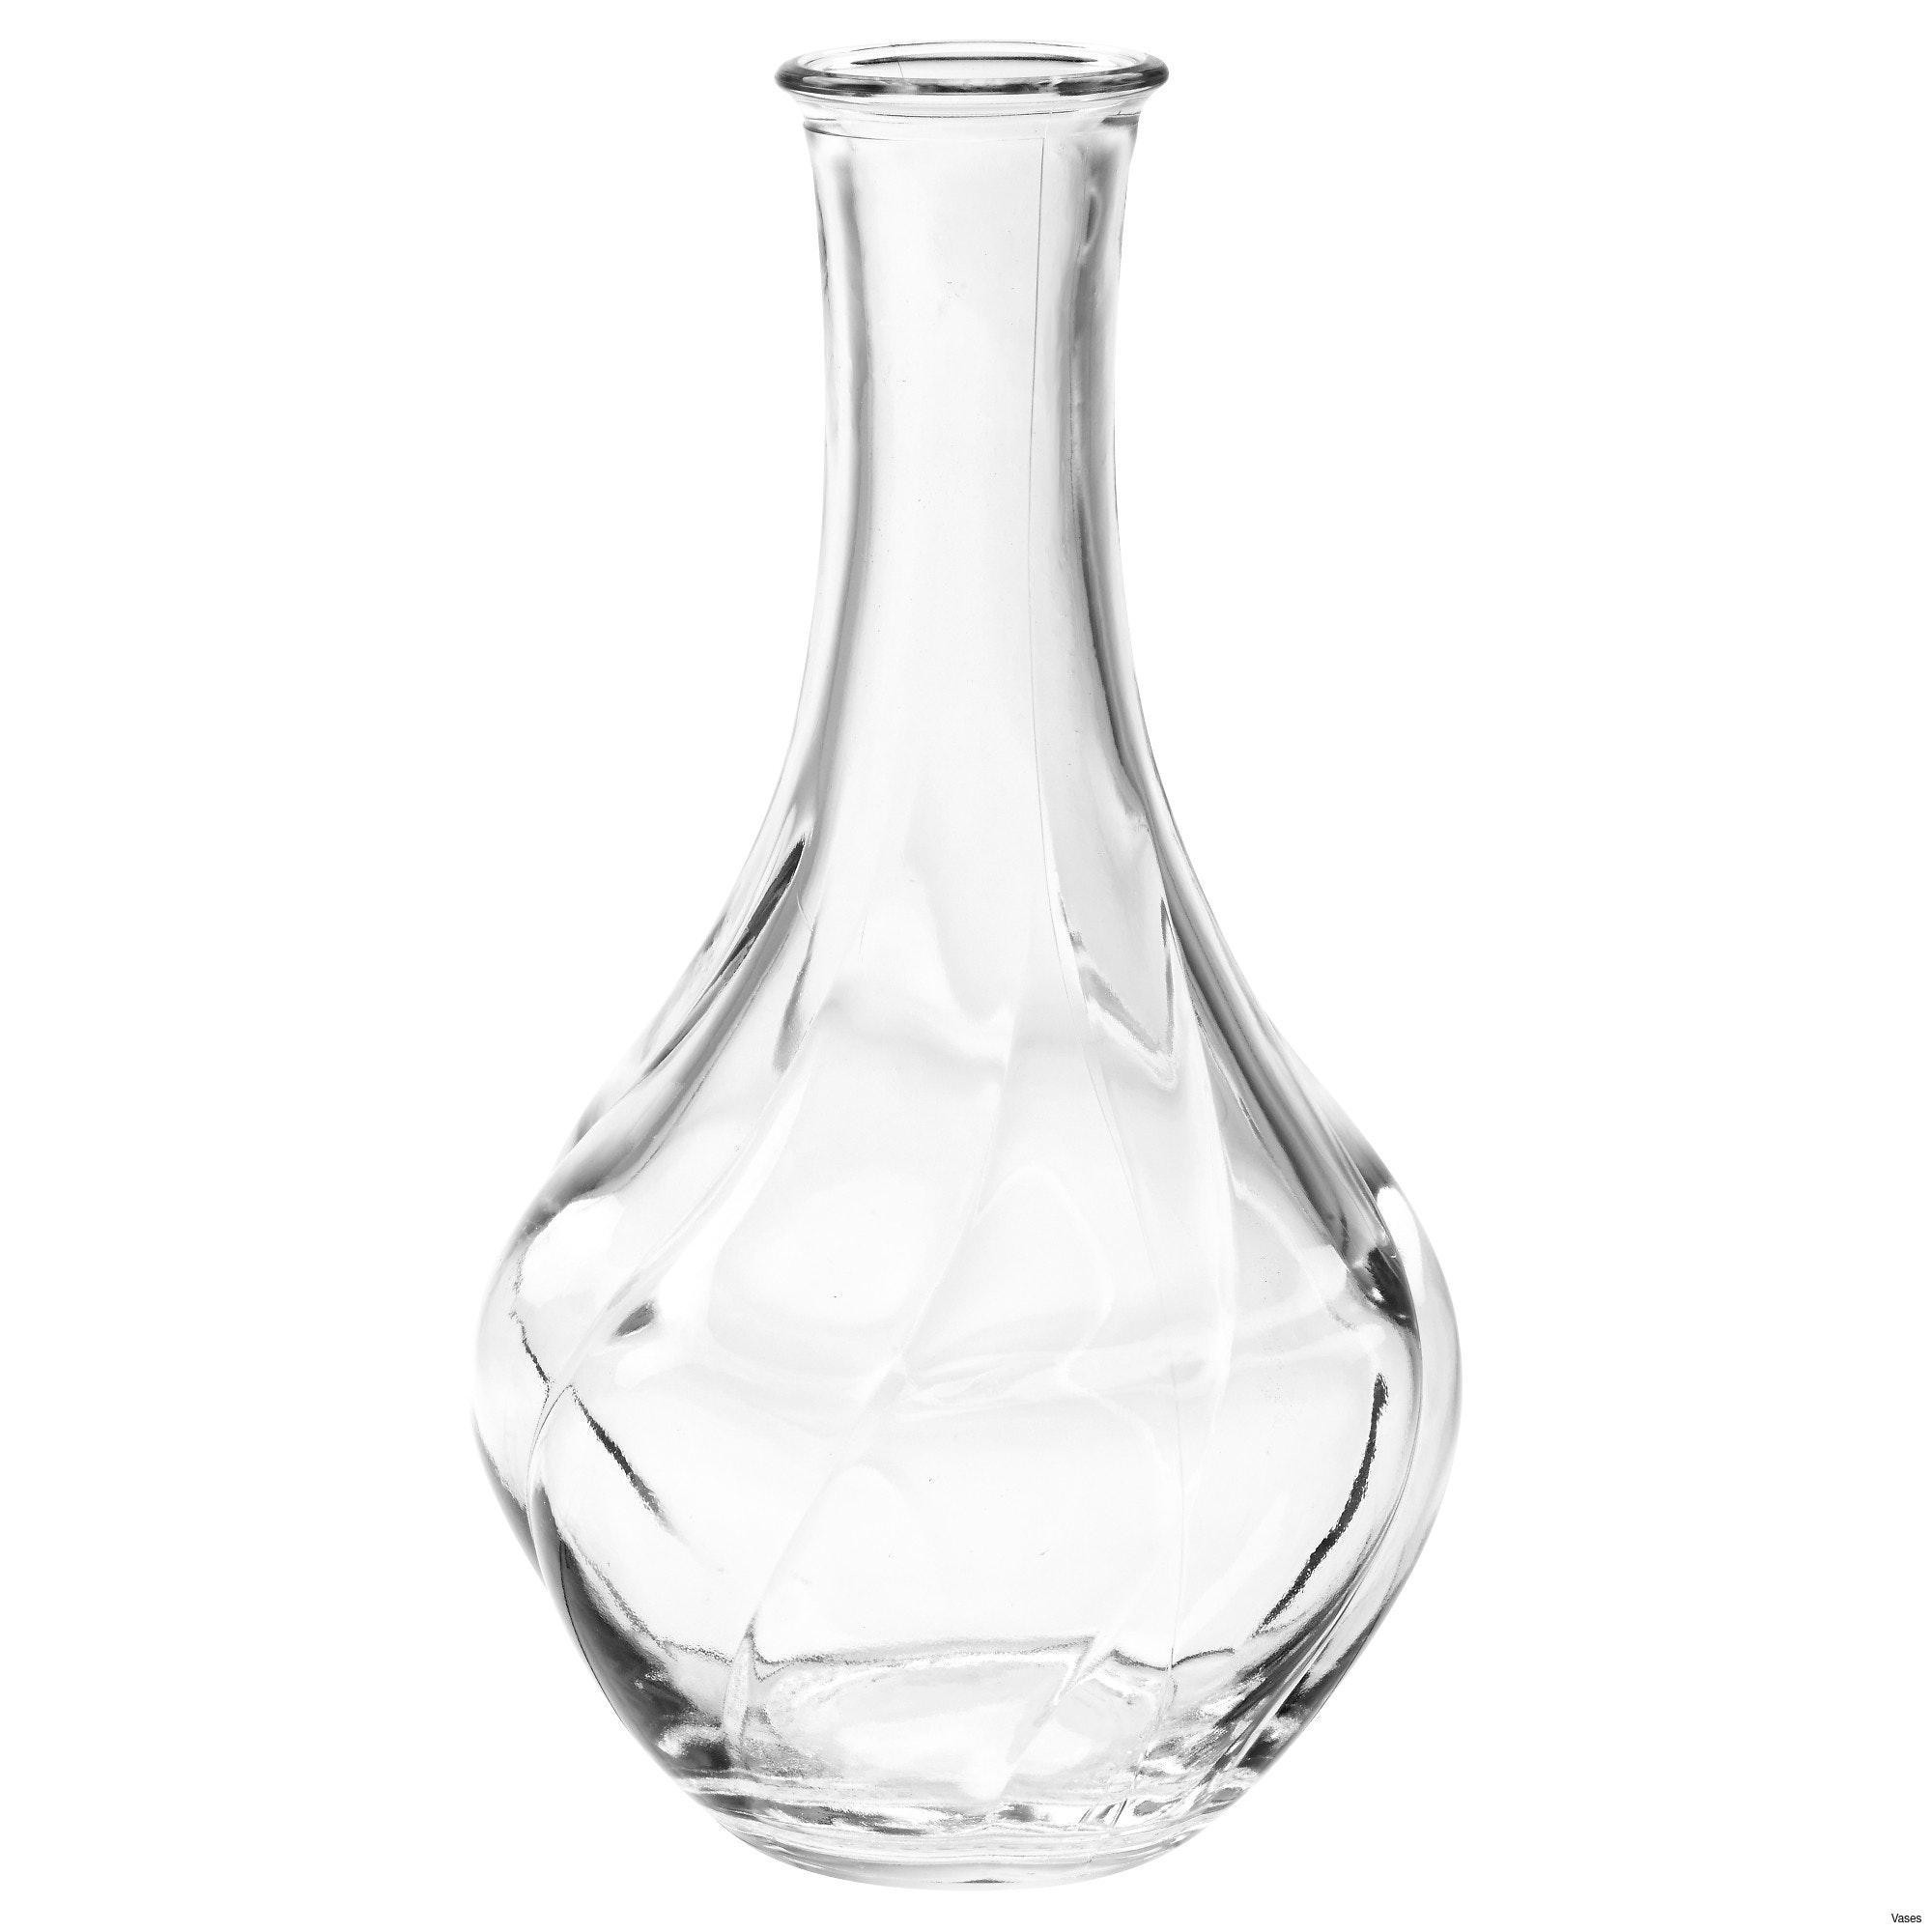 24 Wonderful Clear Glass Bud Vases 2024 free download clear glass bud vases of large clear glass vase collection living room glass vases fresh within large clear glass vase collection living room glass vases fresh clear vase 0d tags amazing and